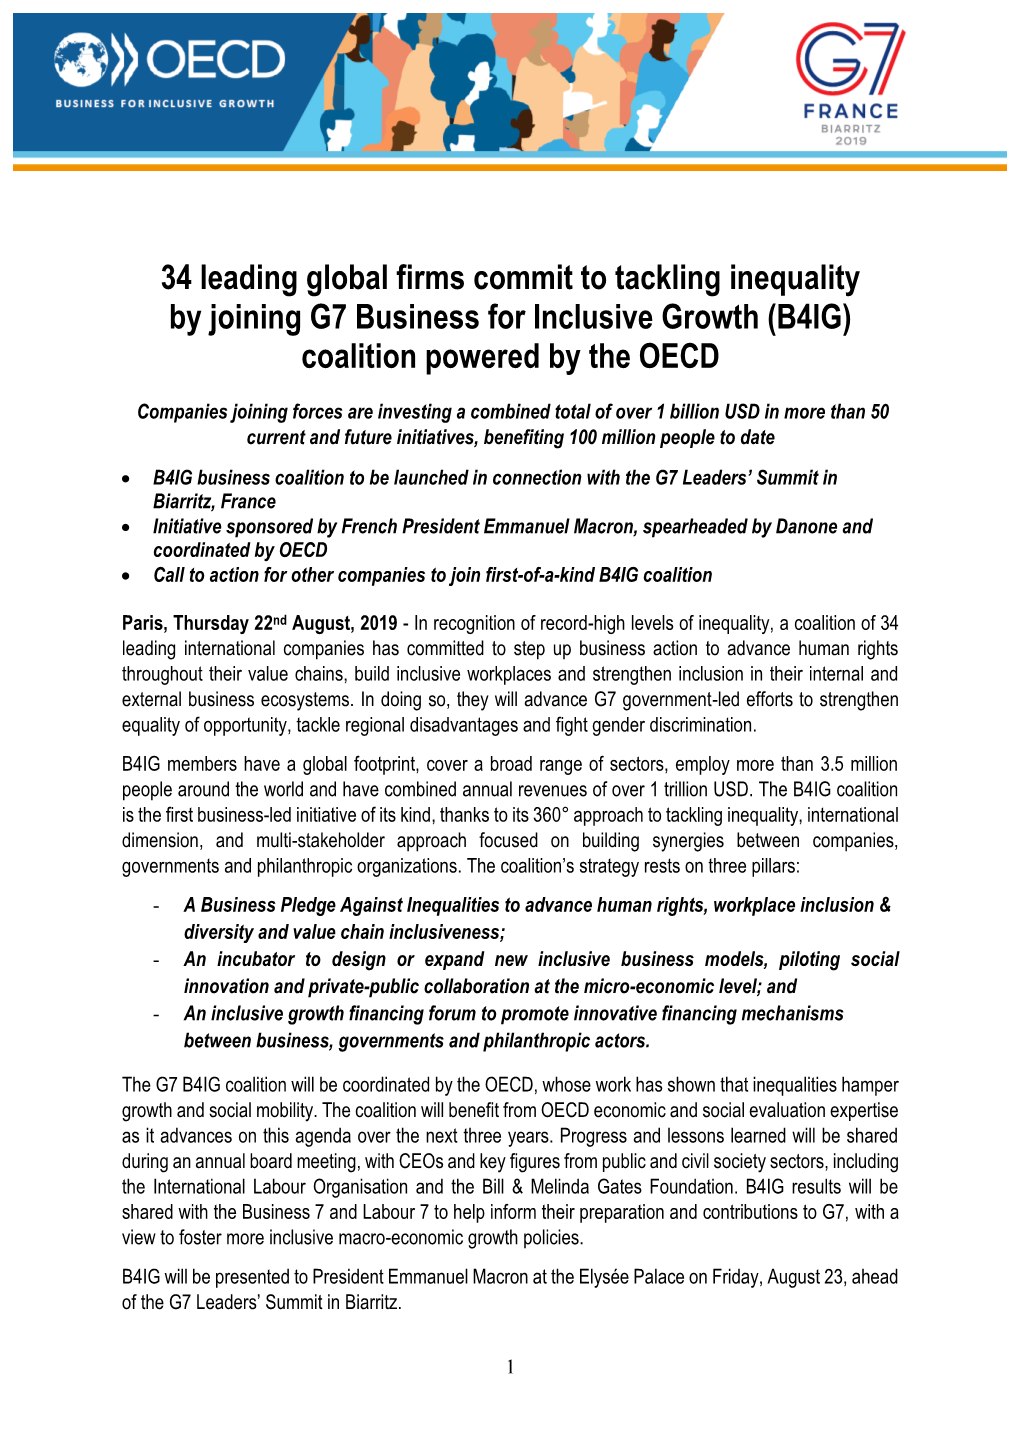 34 Leading Global Firms Commit to Tackling Inequality by Joining G7 Business for Inclusive Growth (B4IG) Coalition Powered by the OECD